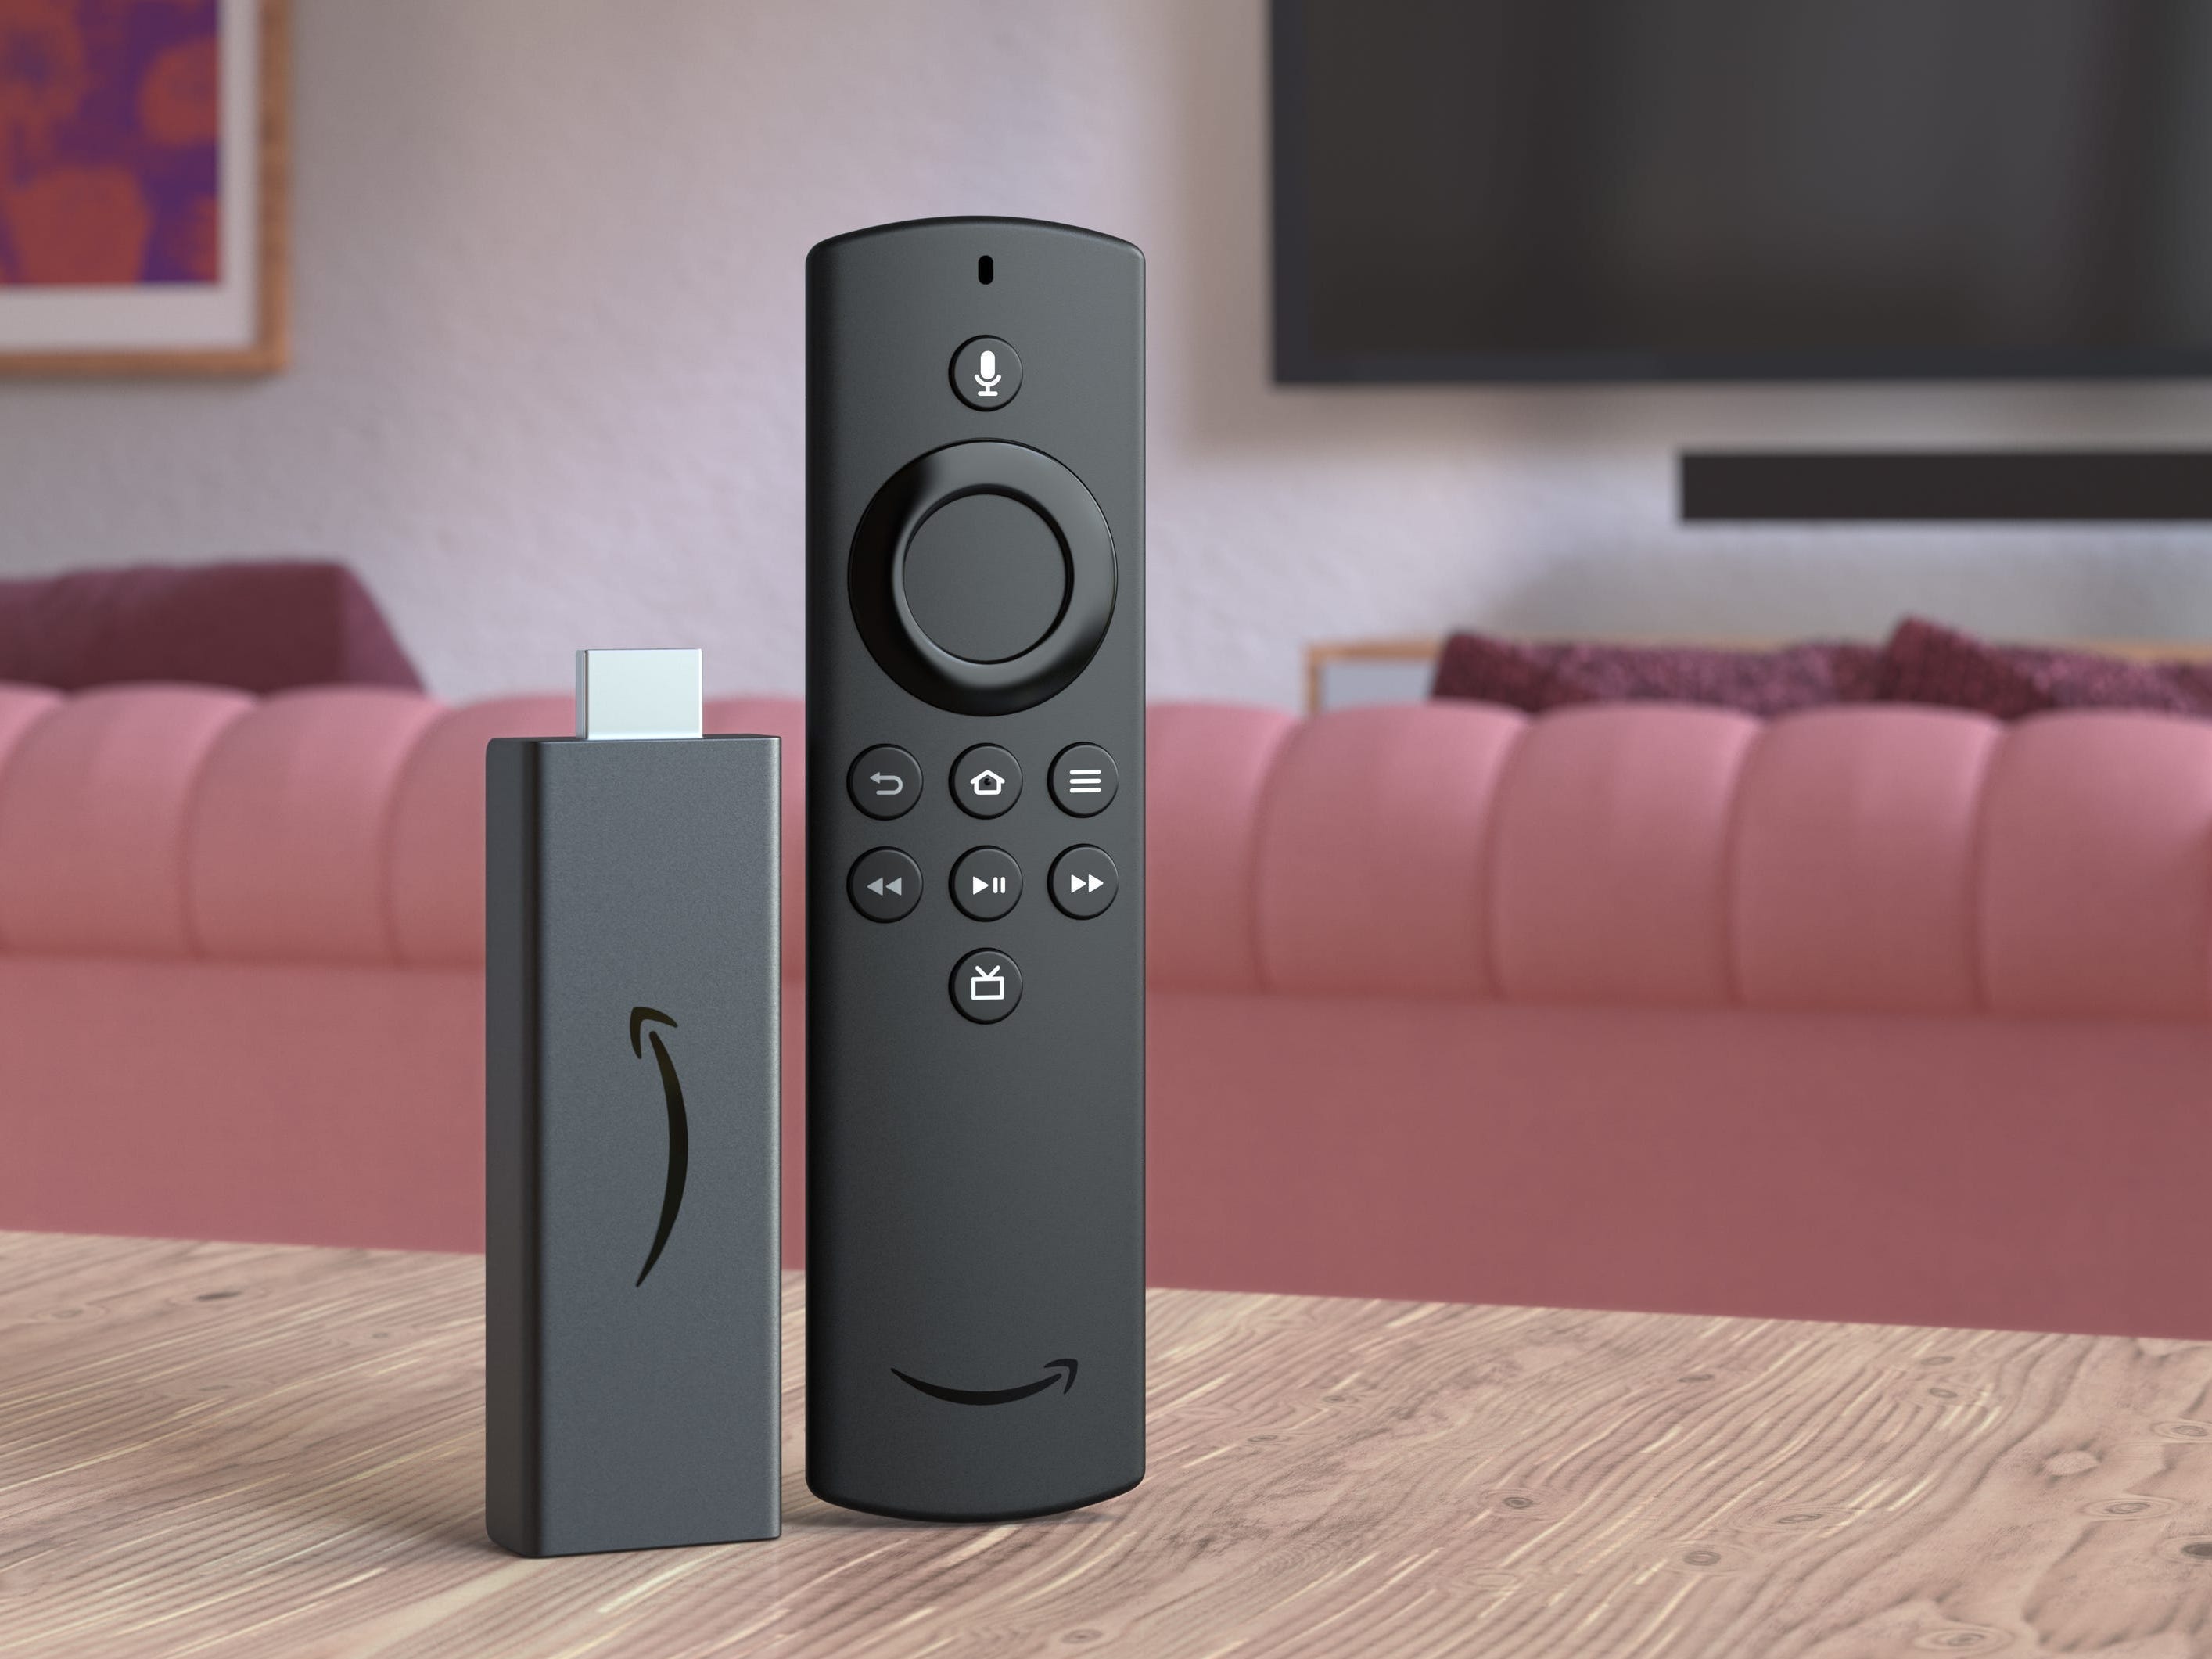 Fire TV Stick Lite and remote on a tabletop in a living room.